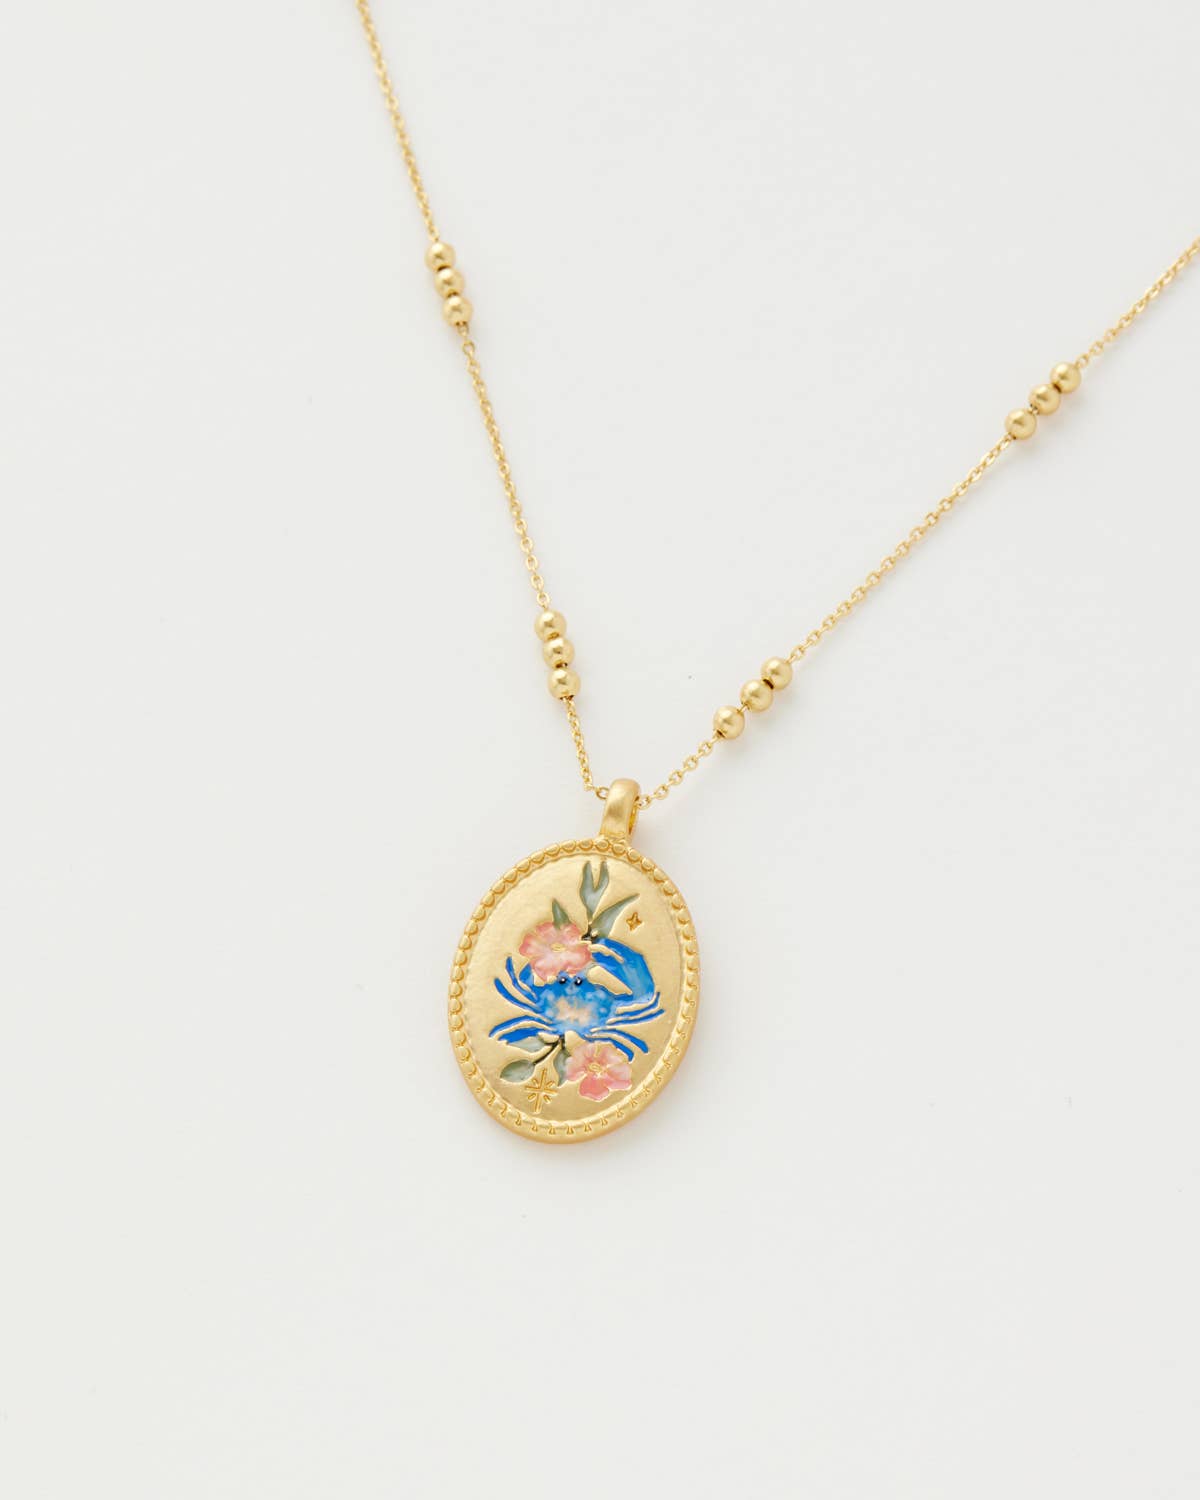 Zodiac Necklace - Cancer - Out of the Blue